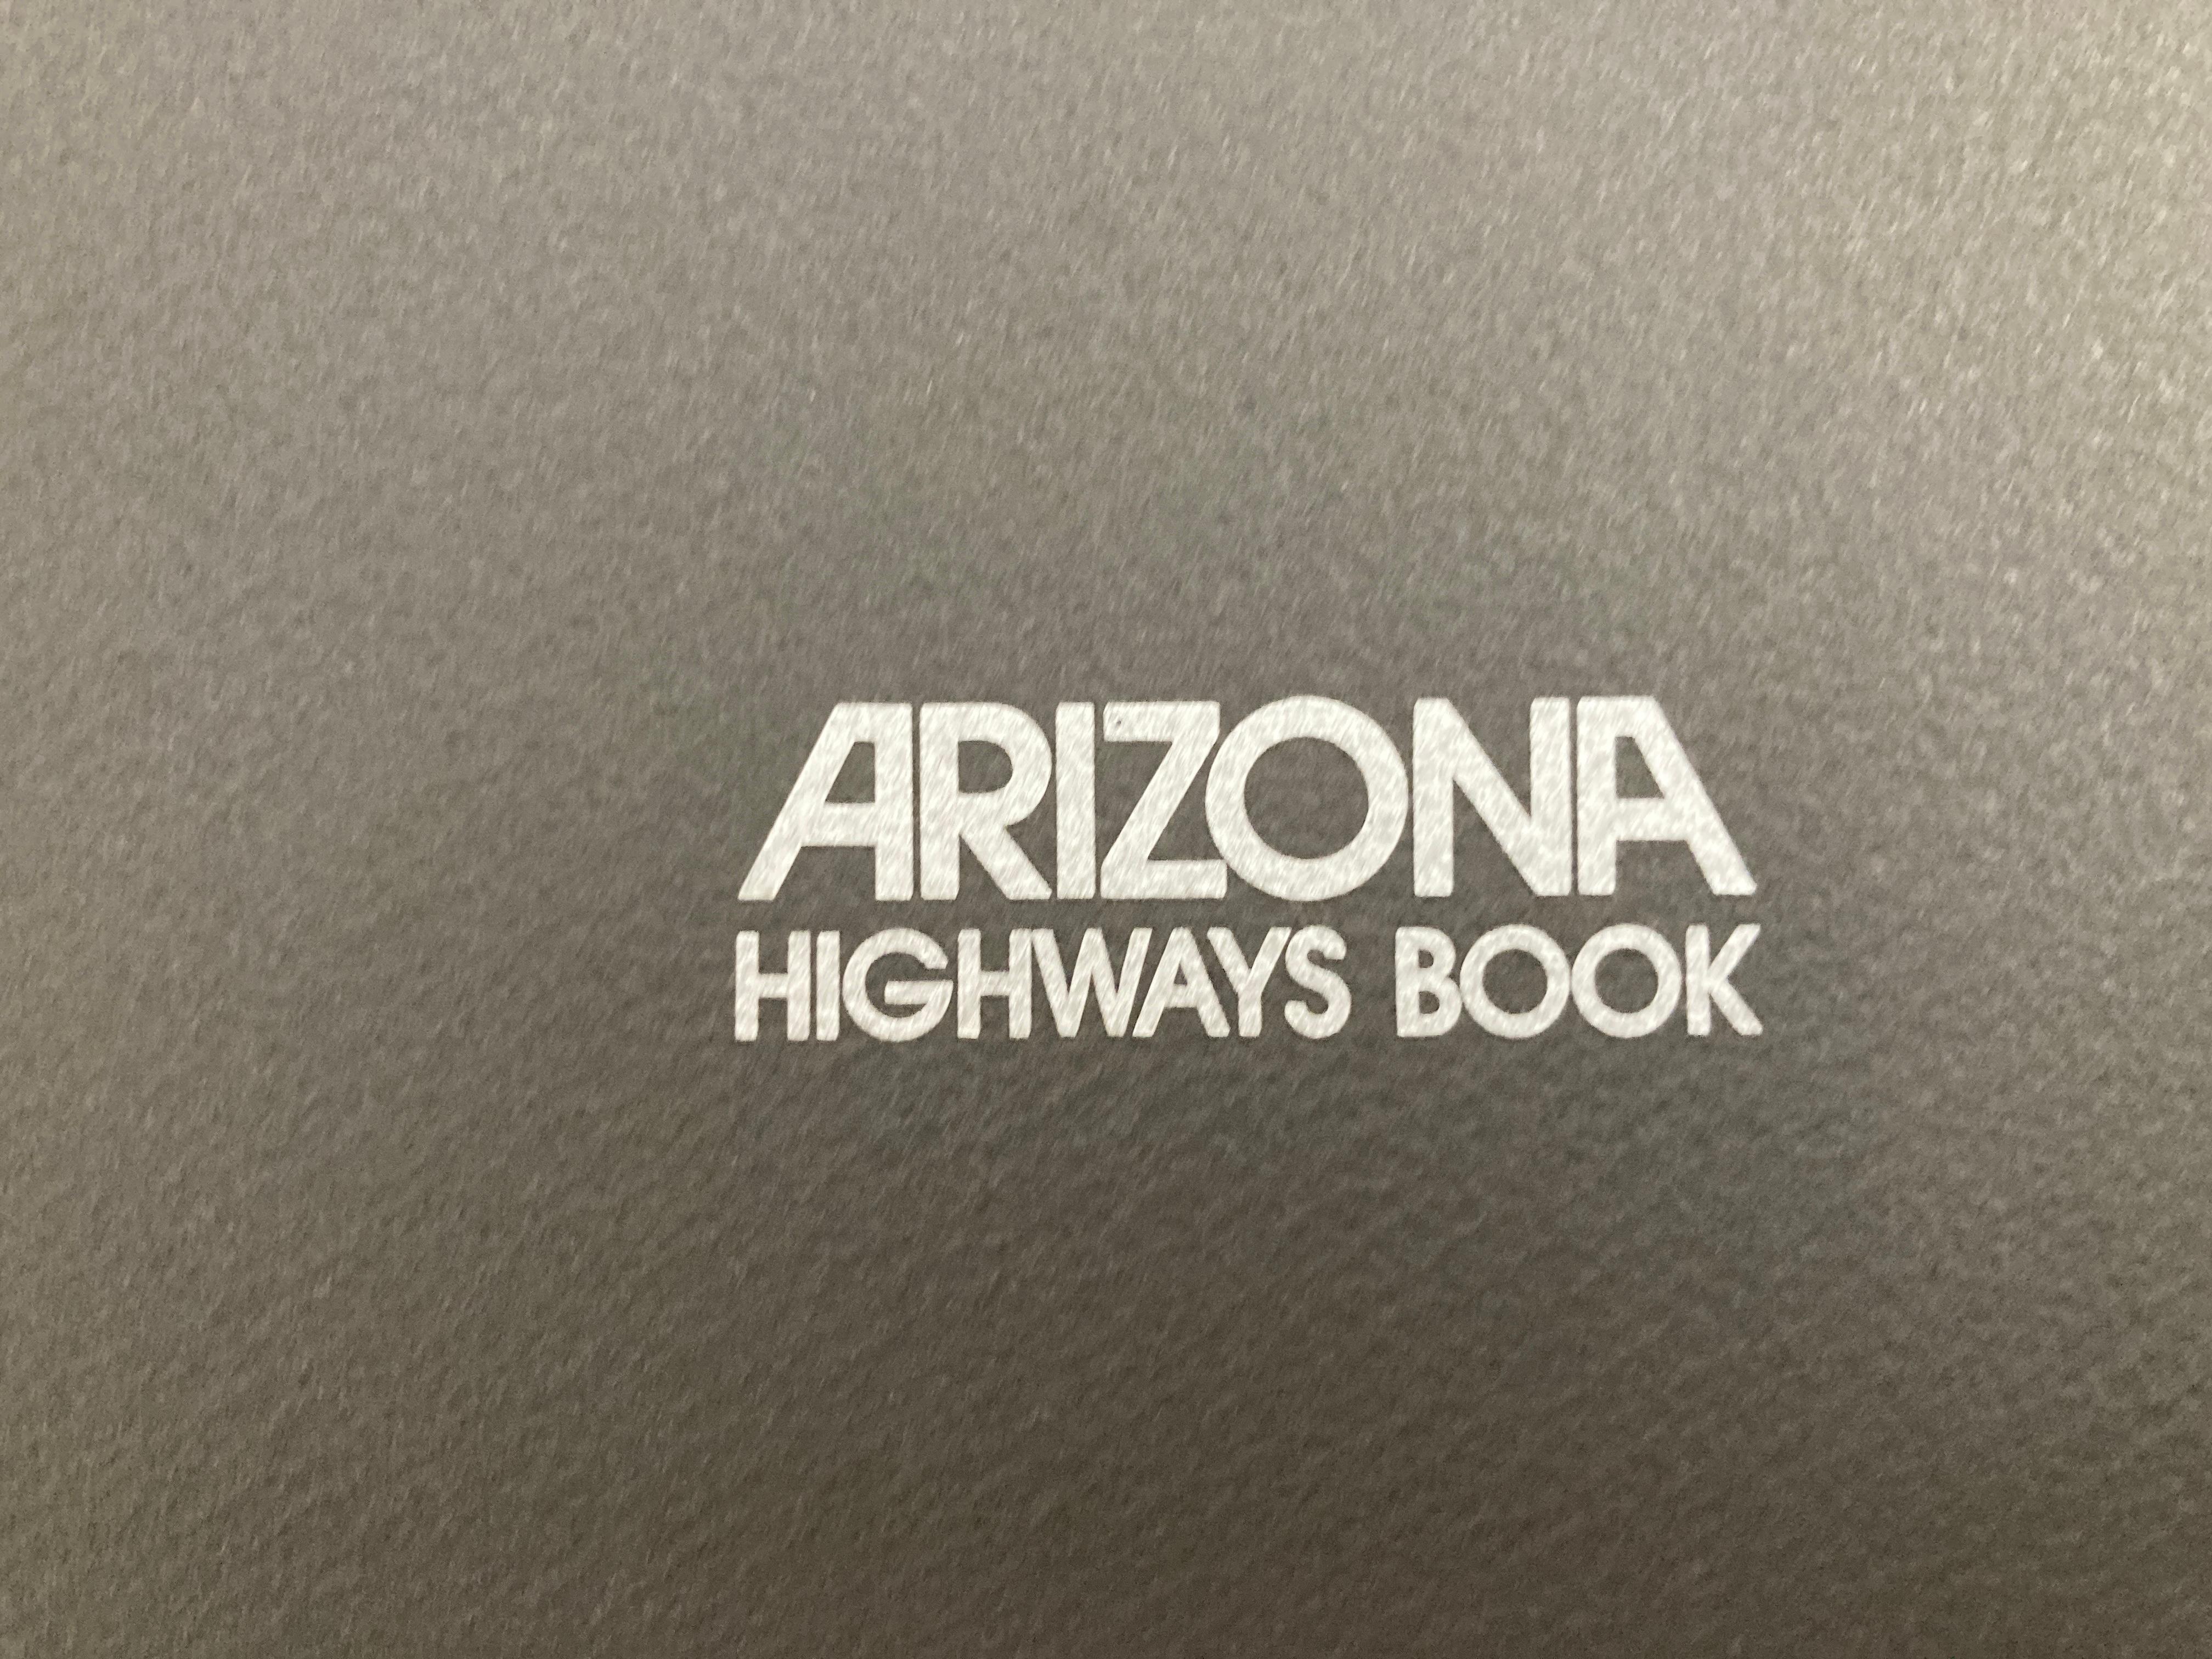 Timeless Images from Arizona Highways Magazine by Dyer, Robert C 1